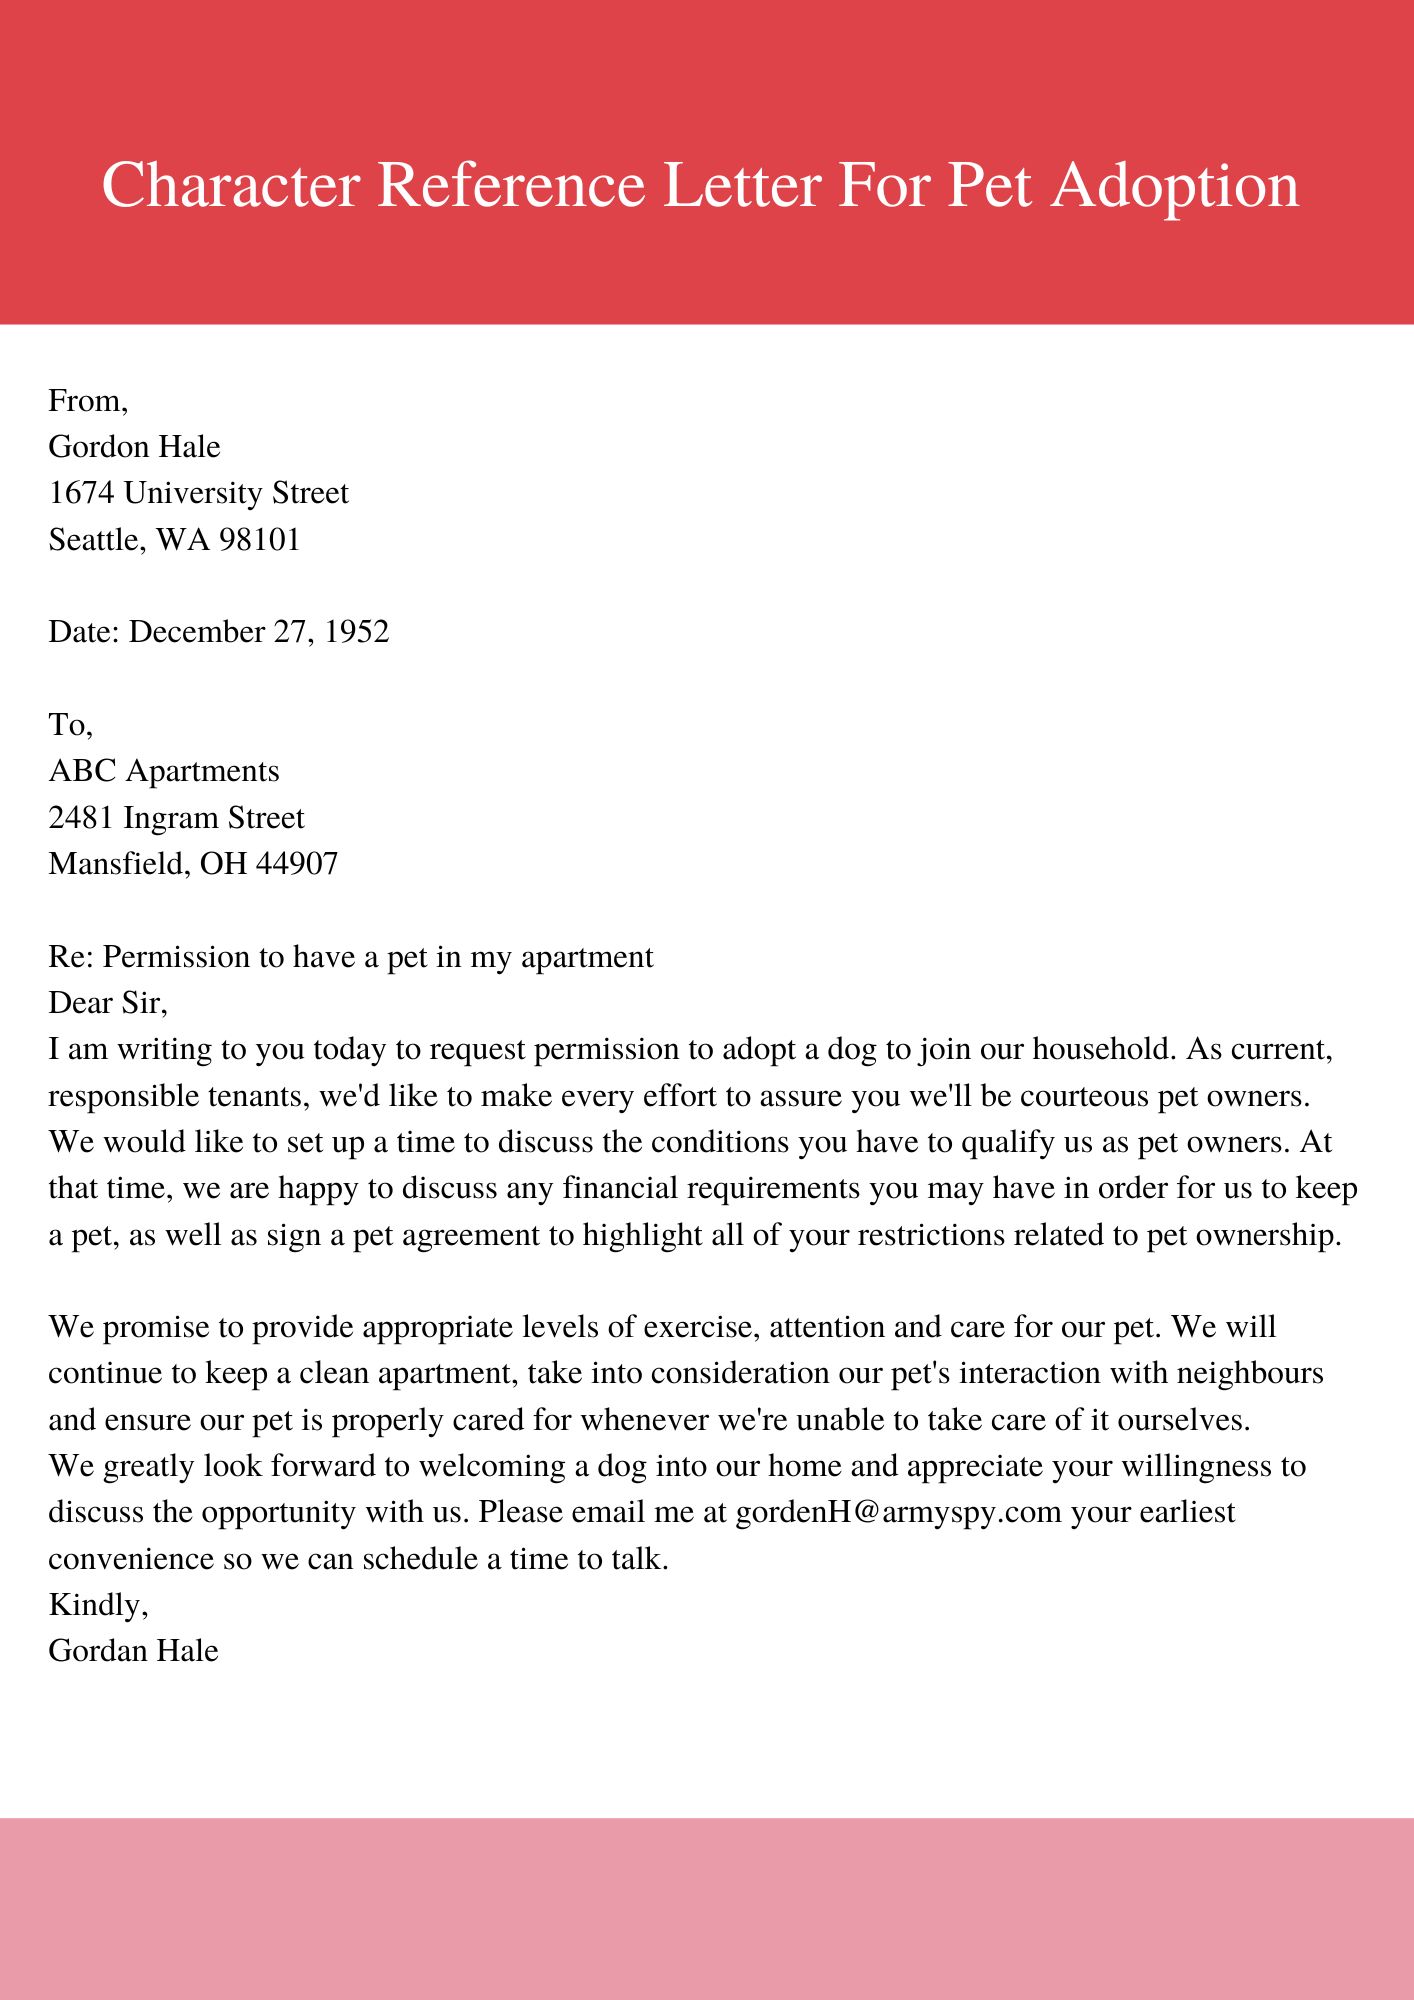 Character Reference Letter For Pet Adoption Template 